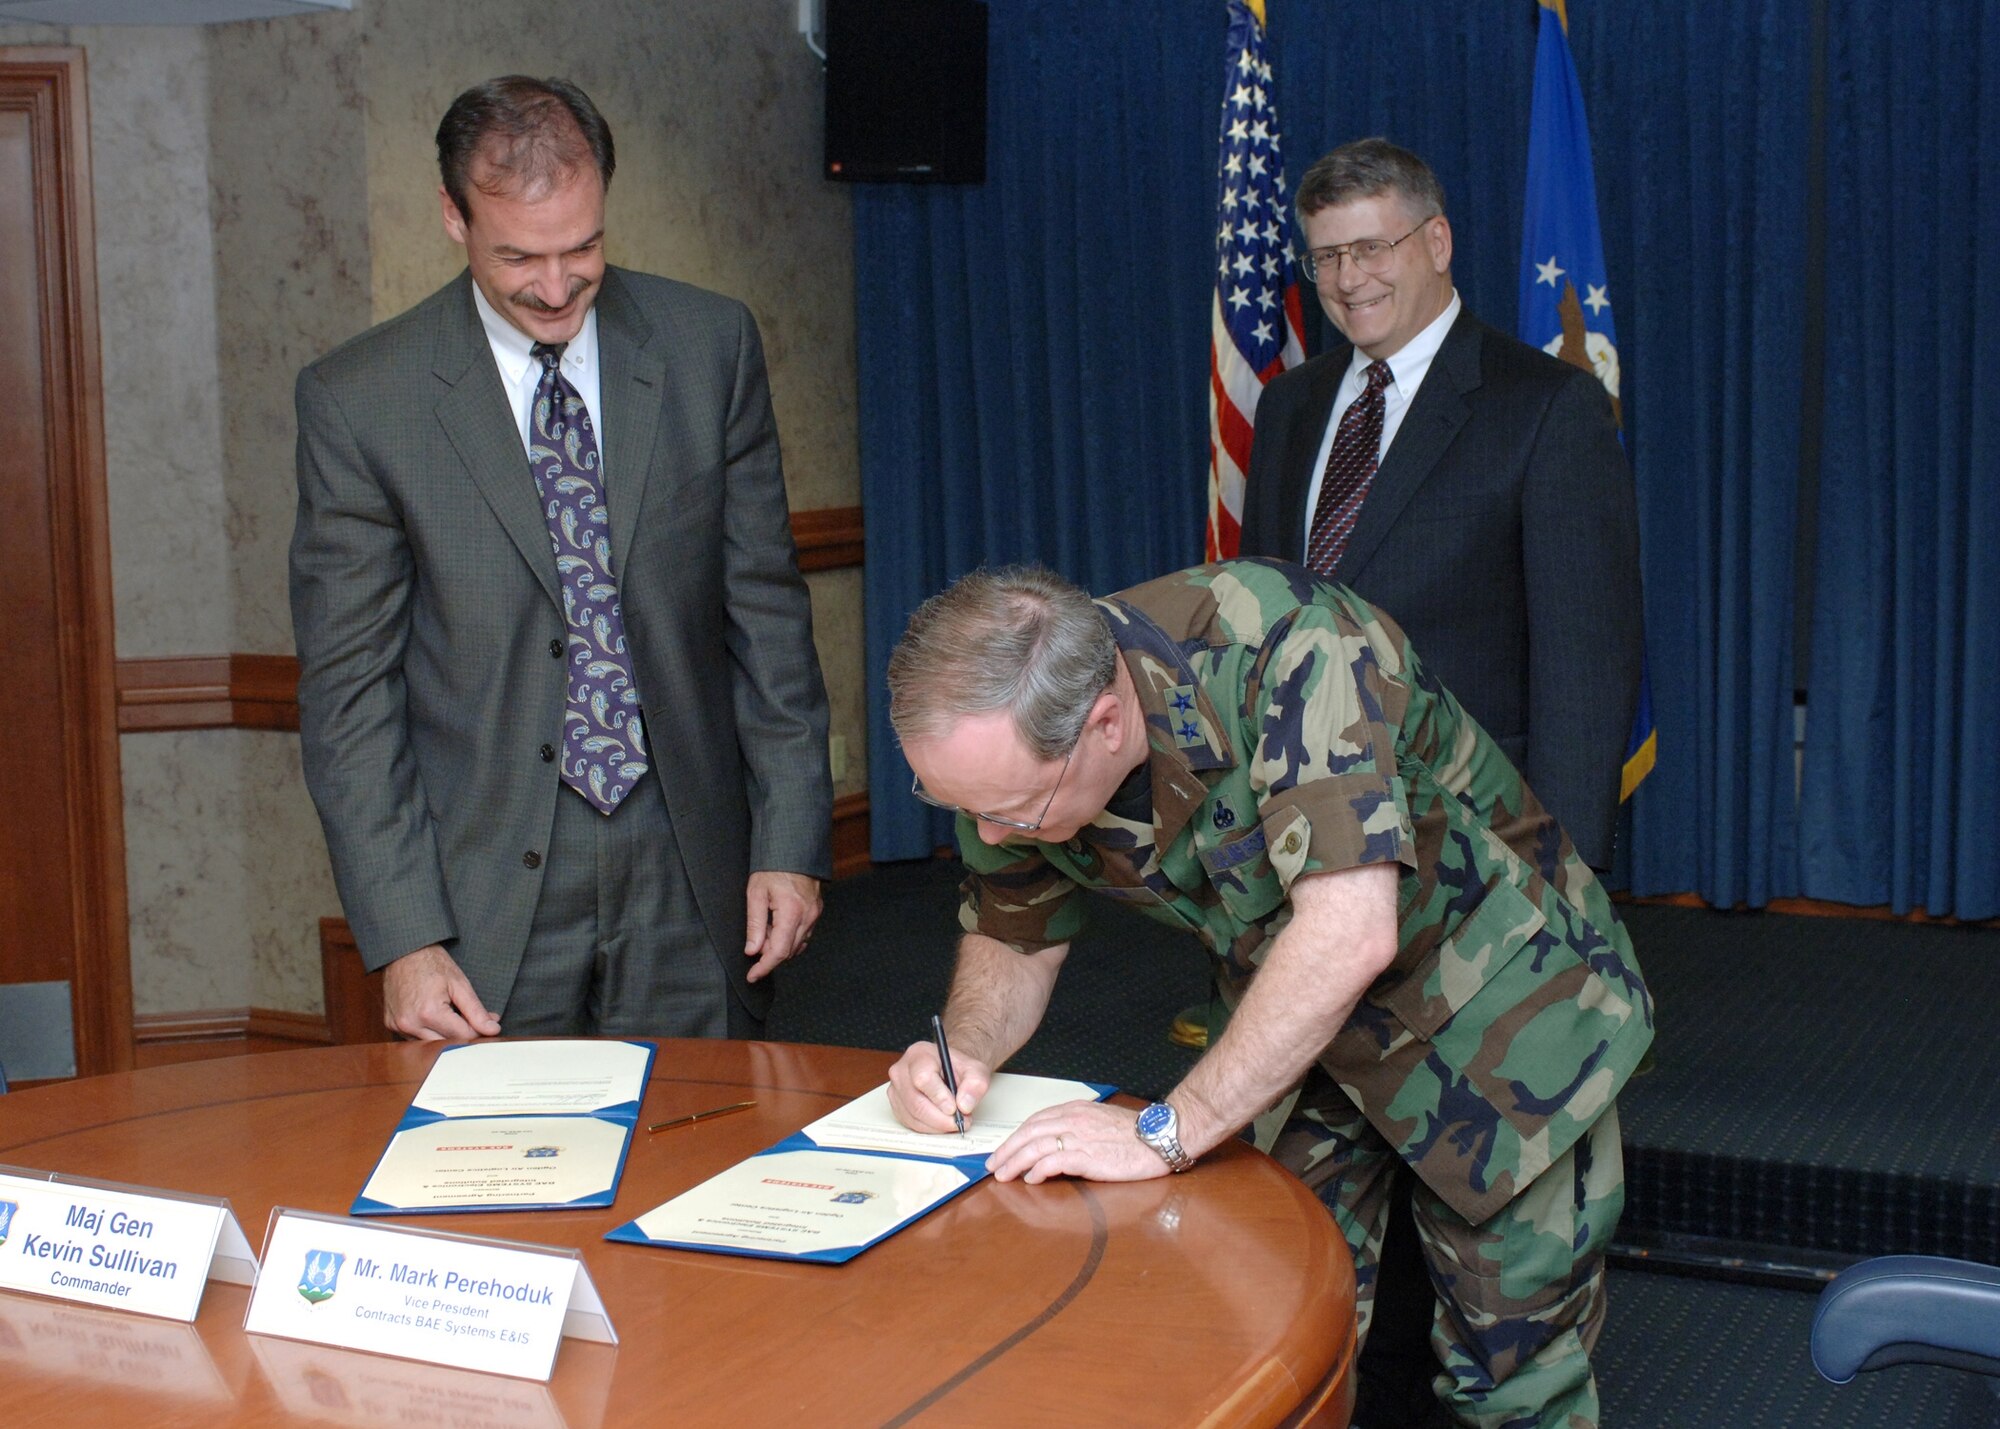 HILL AIR FORCE BASE, Utah - Maj. Gen. Kevin Sullivan, Ogden Air Logistics Center commander, signs the BAE Systems partnership agreement May 11 at Hill Air Force, Base Utah. At left, Mark Perehoduk, vice president for contracts at BAE Systems, awaits his turn to sign the document. In back is BAE Systems Jeff Cook, vice president for readiness and sustainment. (Air Force photo by Carl Burnett)

